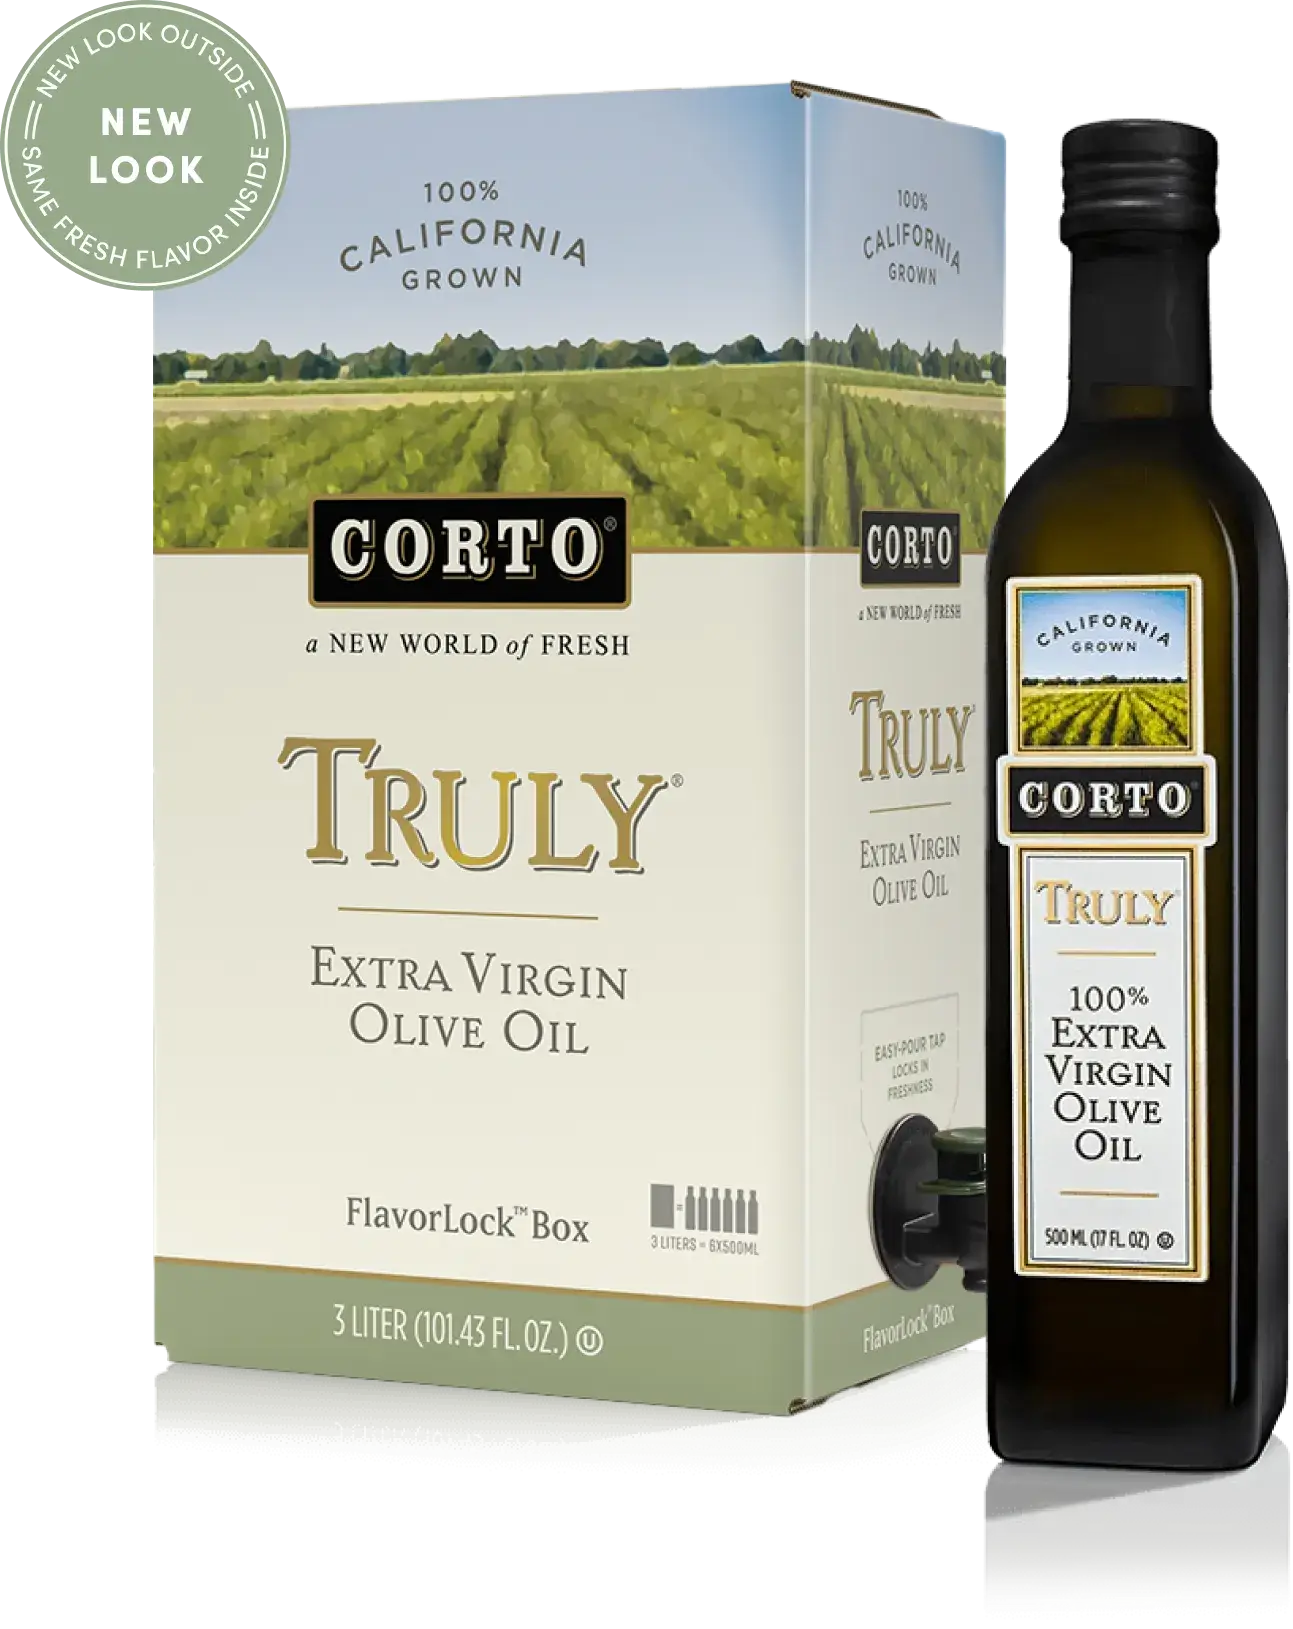 TRULY® Extra Virgin Olive Oil from Corto | Buy Online Corto Olive Oil